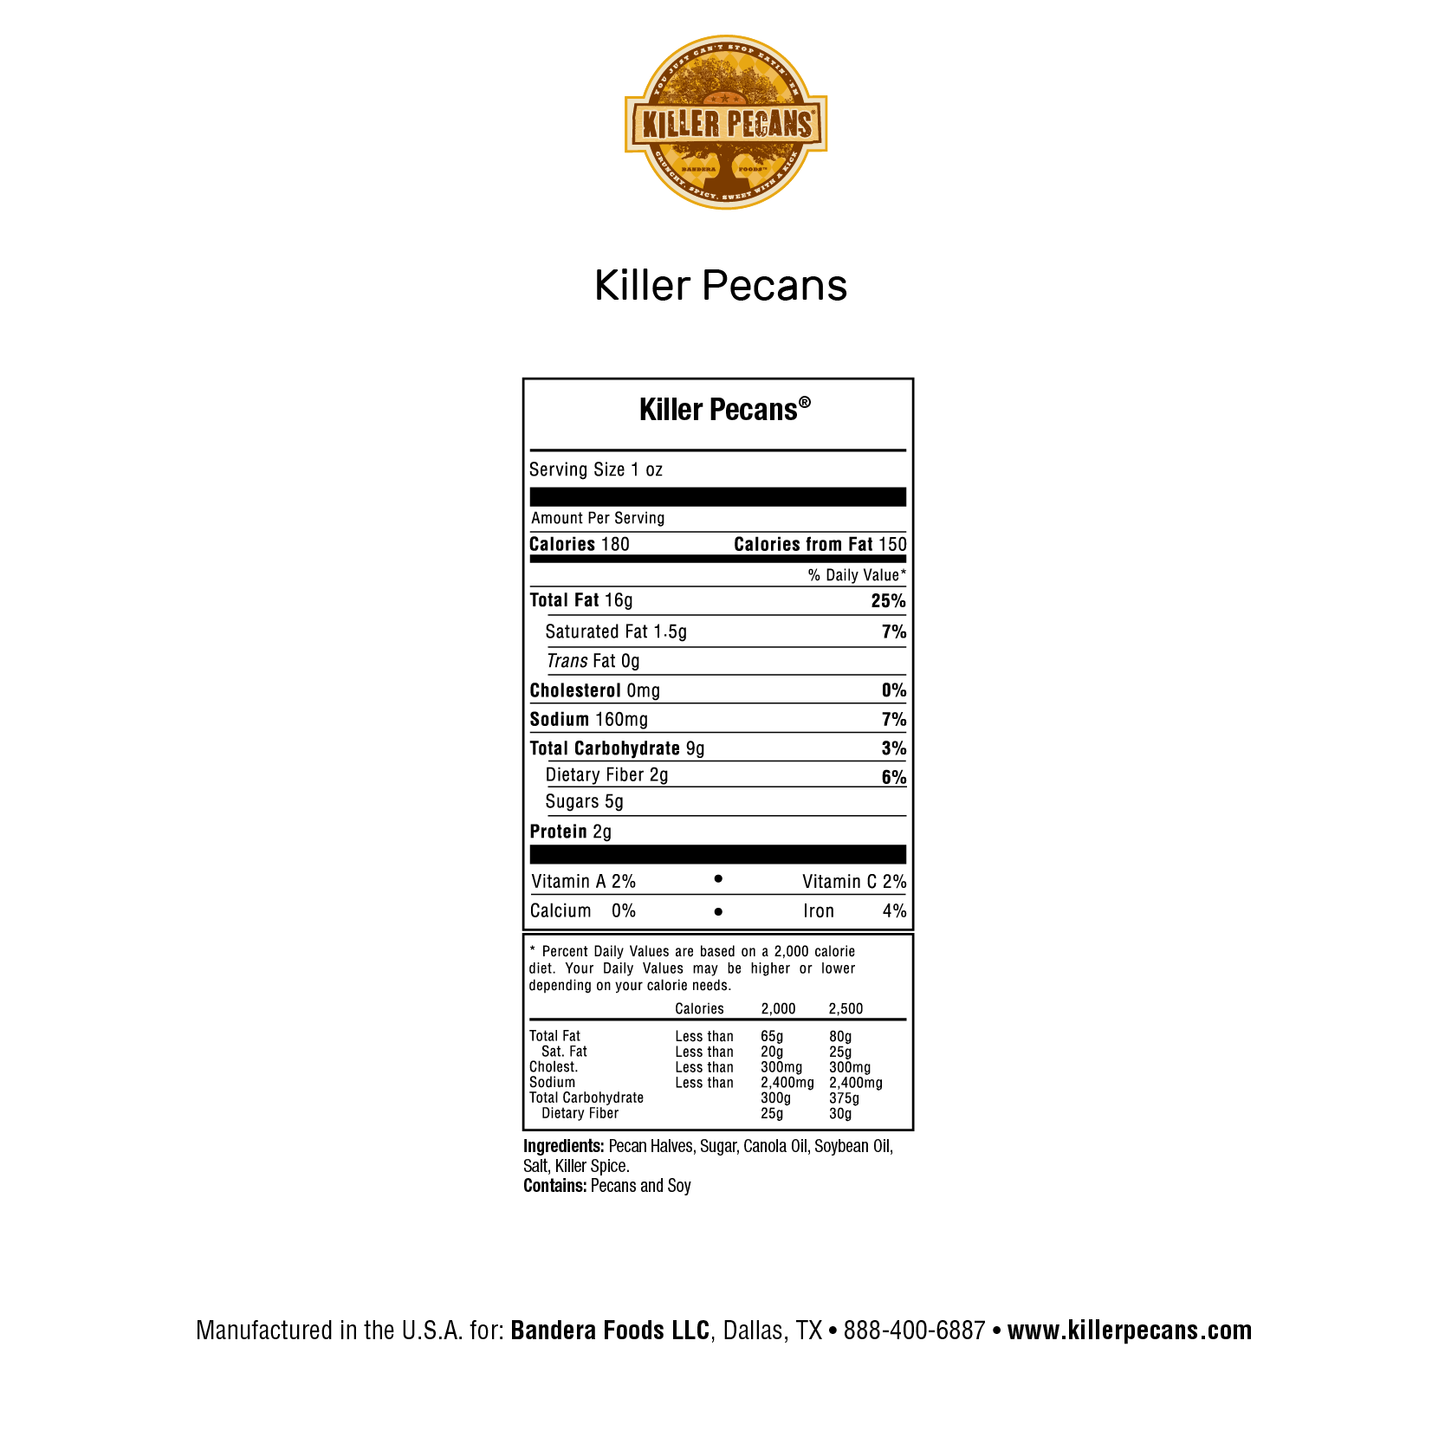 Killer Pecans 16oz bag Crunchy Spicy Sweet with a Kick. All Natural, Gluten-free. Nutrition Panel